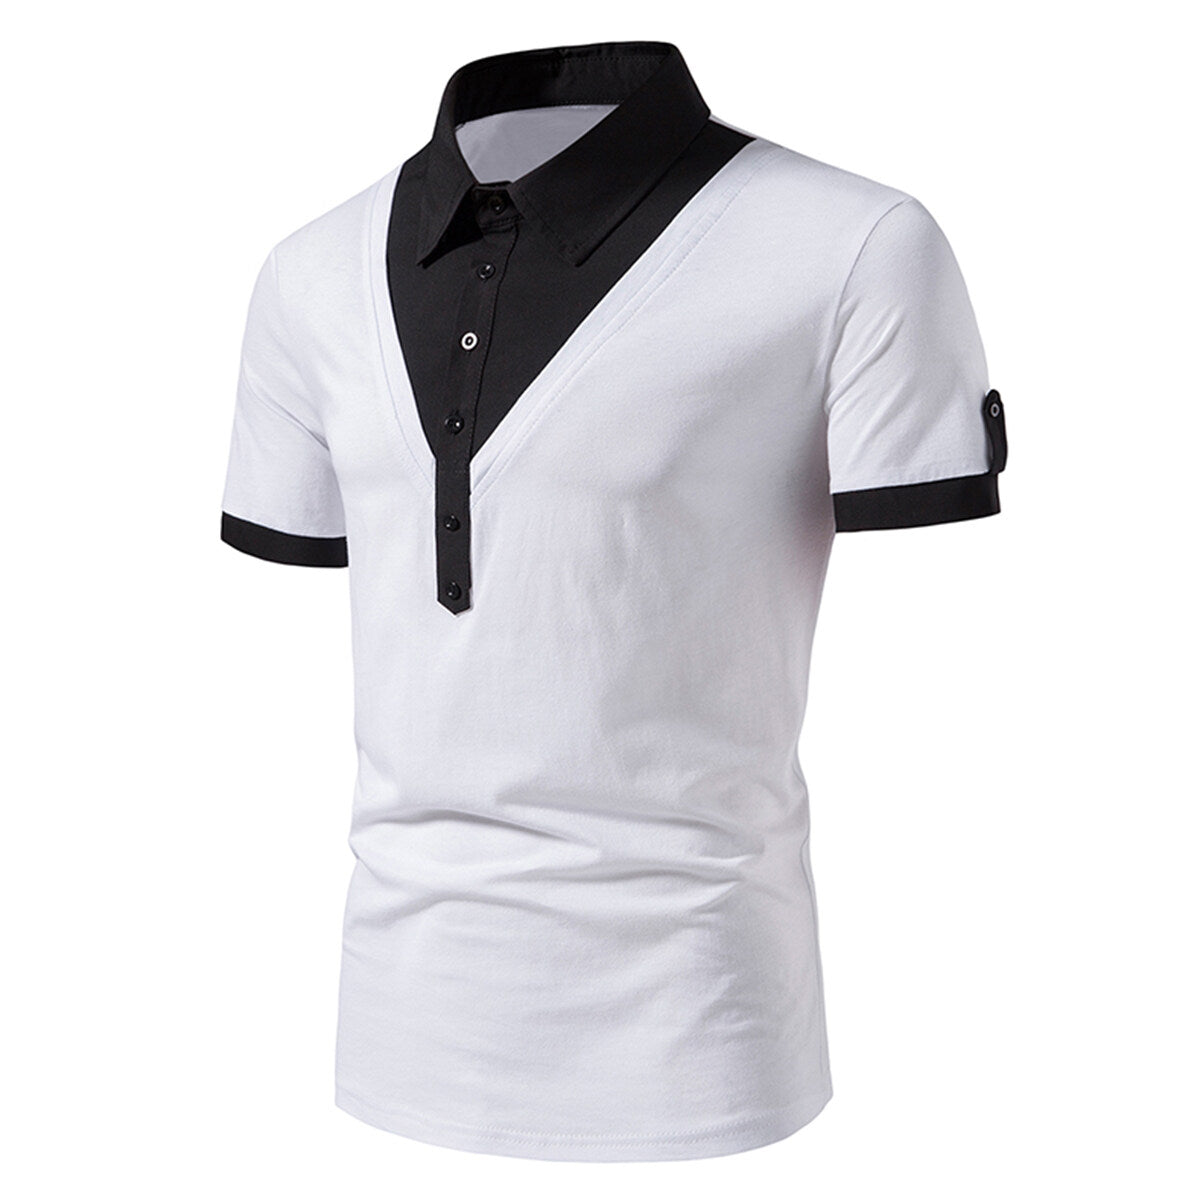 Men's Colorful Patchwork Polo Neck Short Sleeve T-Shirt White